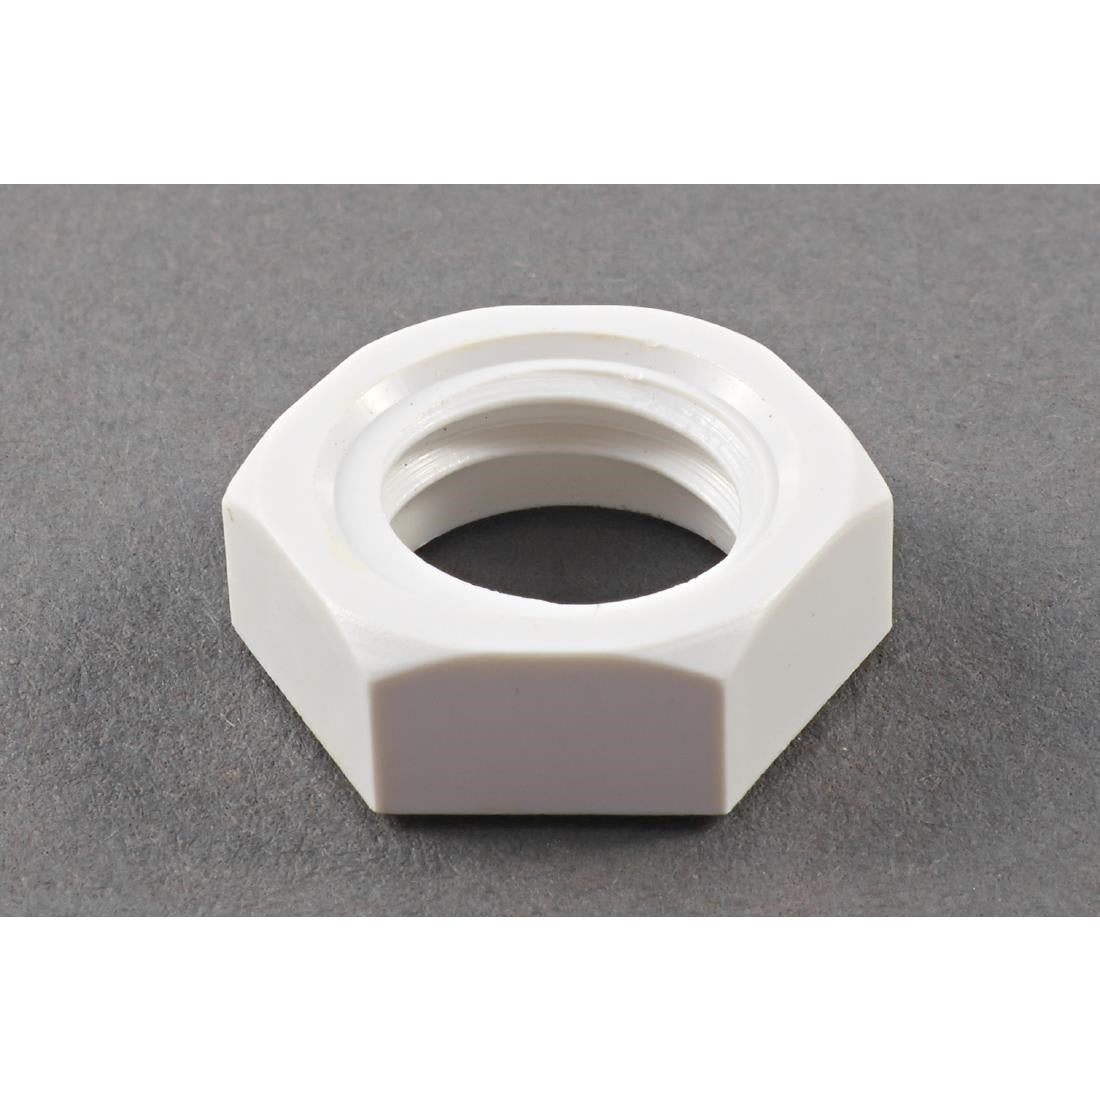 Drainage Connector Nut JD Catering Equipment Solutions Ltd